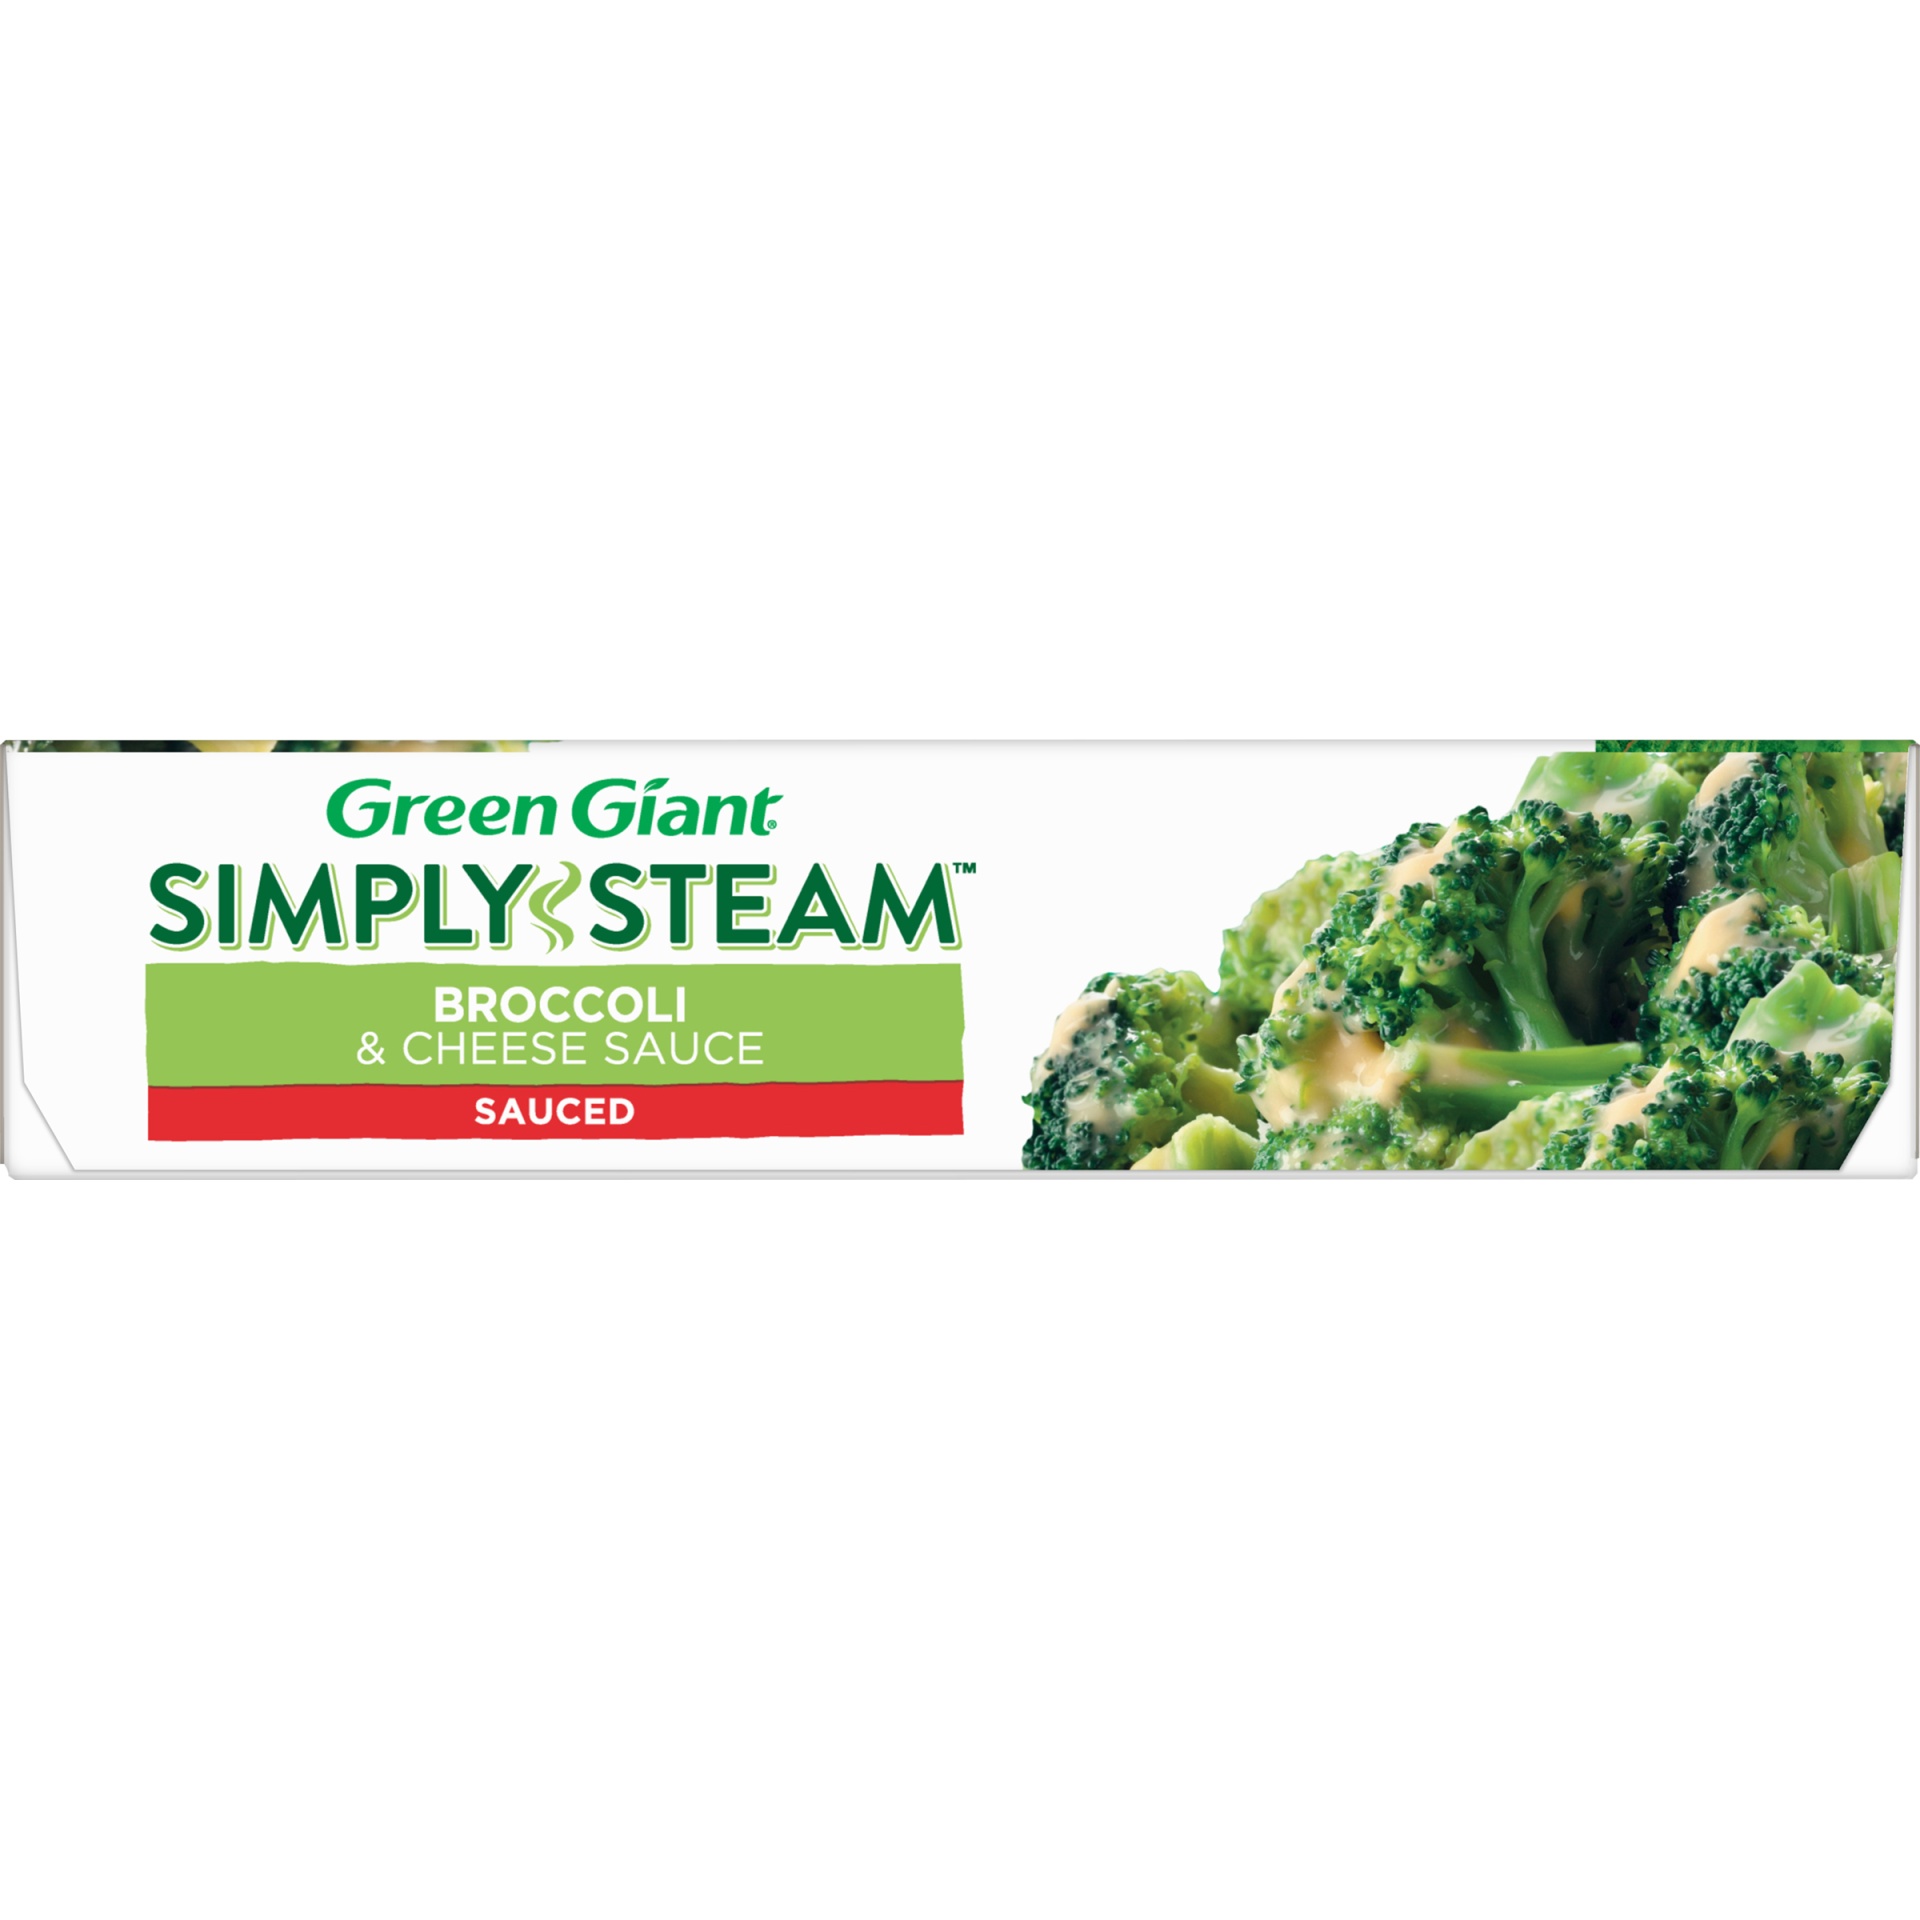 slide 8 of 8, Green Giant Simply Steam Sauced Broccoli & Cheese Sauce 10 oz, 10 oz